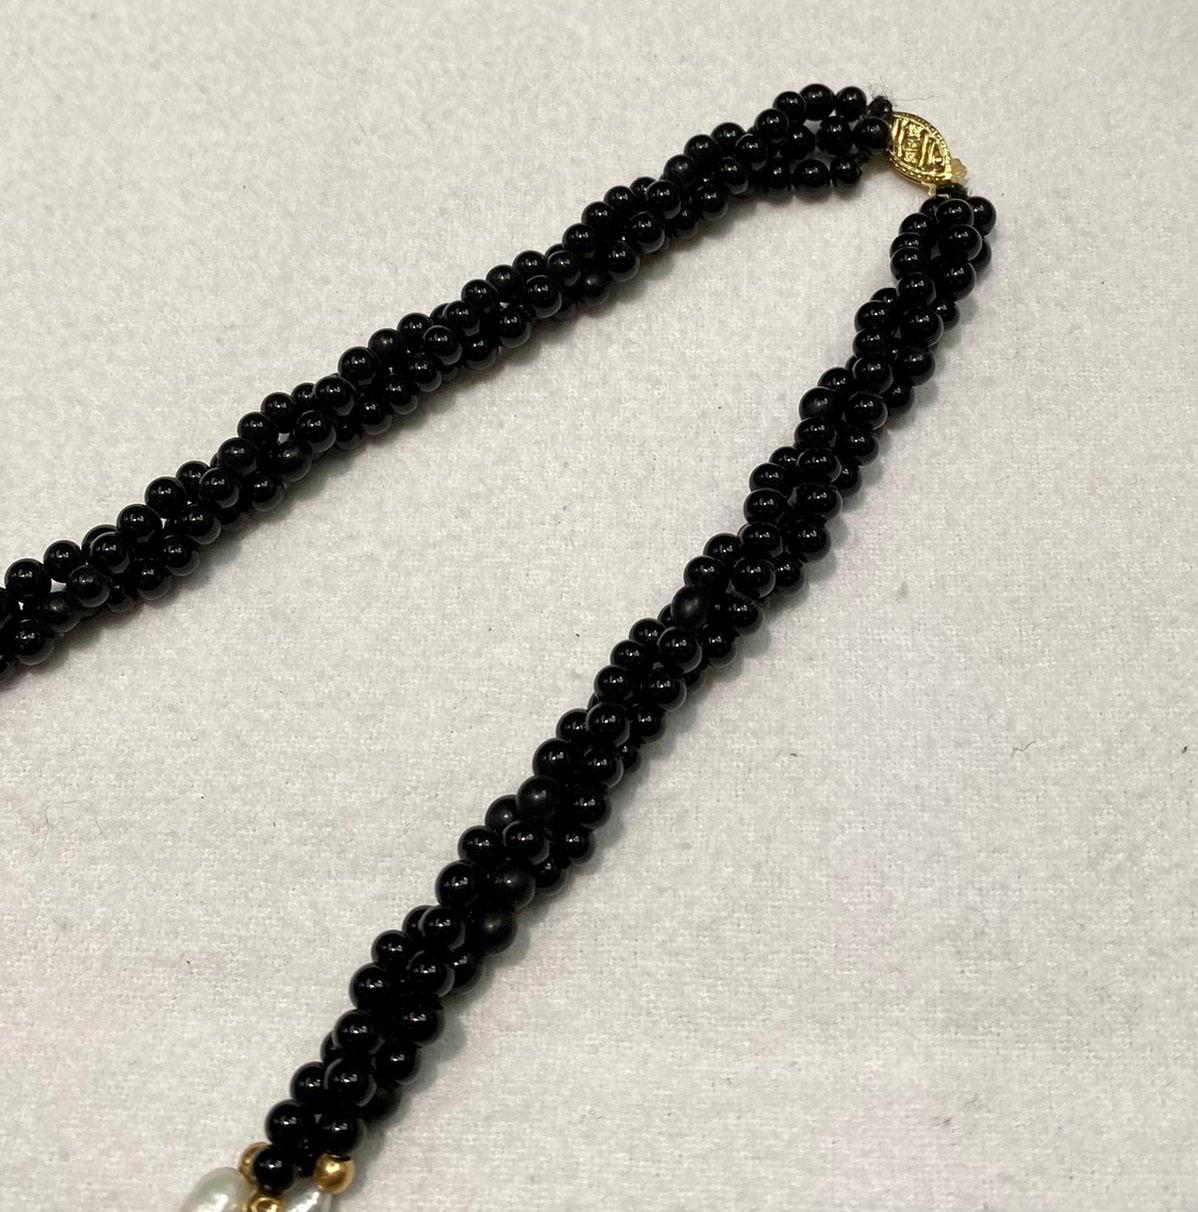 3 Strands of Onyx Pearls with 8pcs of Freshwater Pearls and Onyx Centerpiece For Sale 2